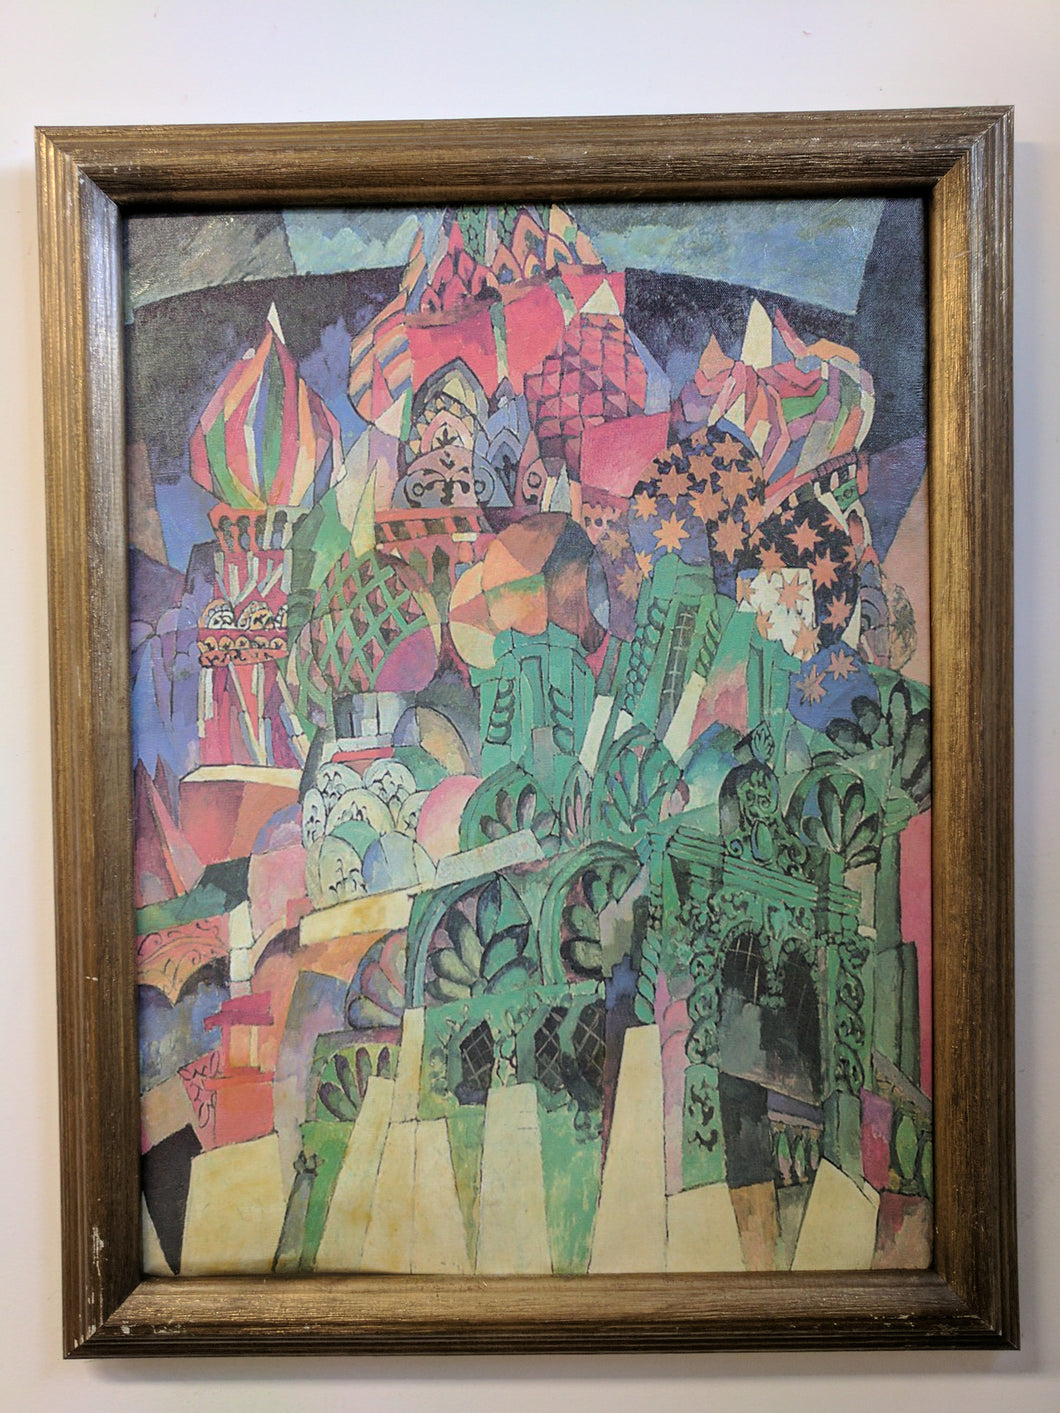 A-0008 St. Basil's Cathedral Painting by Aristarkh Lentulov